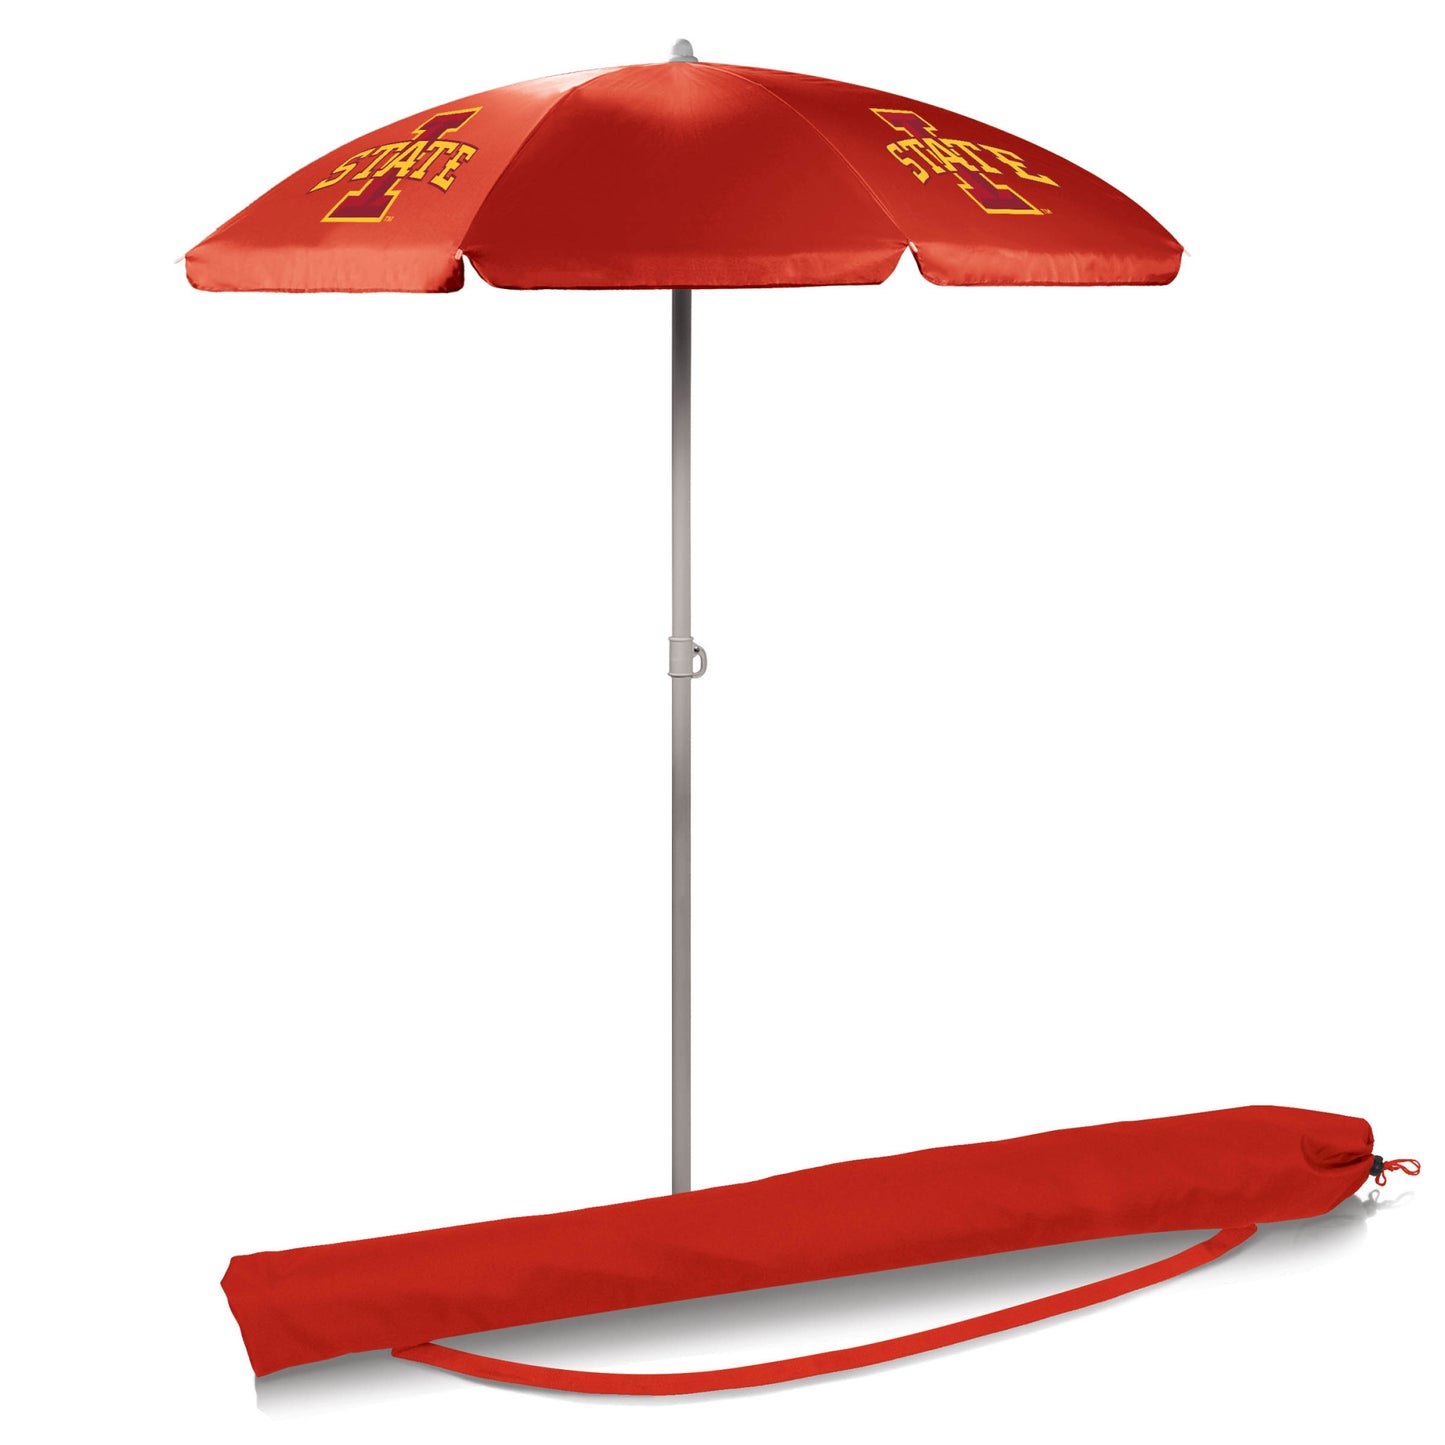 Iowa State Cyclones 5.5' Portable Red Beach Umbrella by Picnic Time